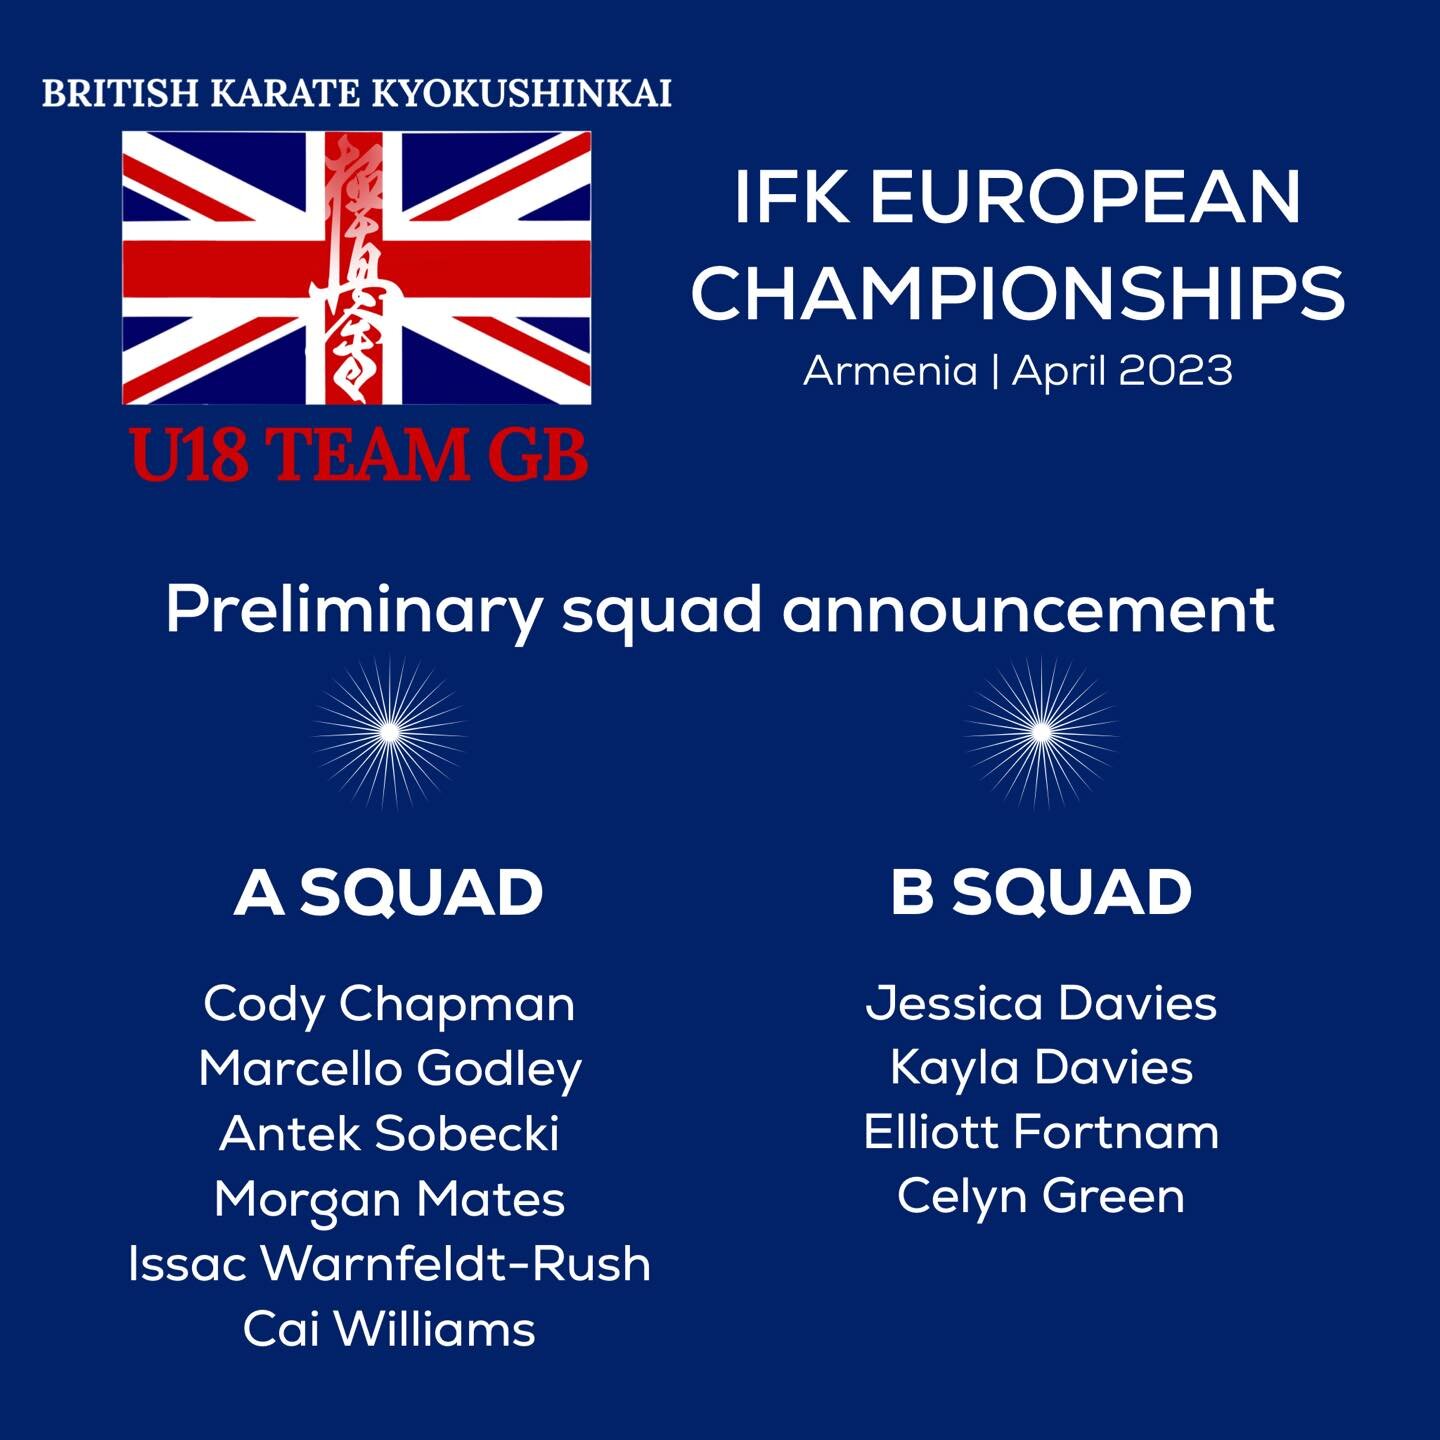 Preliminary U18 Team GB squads announcement.

In preparation for the IFK European Championships in April 2023, a preliminary squad was selected on 27th November.

The selections represent experience, and tournament and training performances, in consu